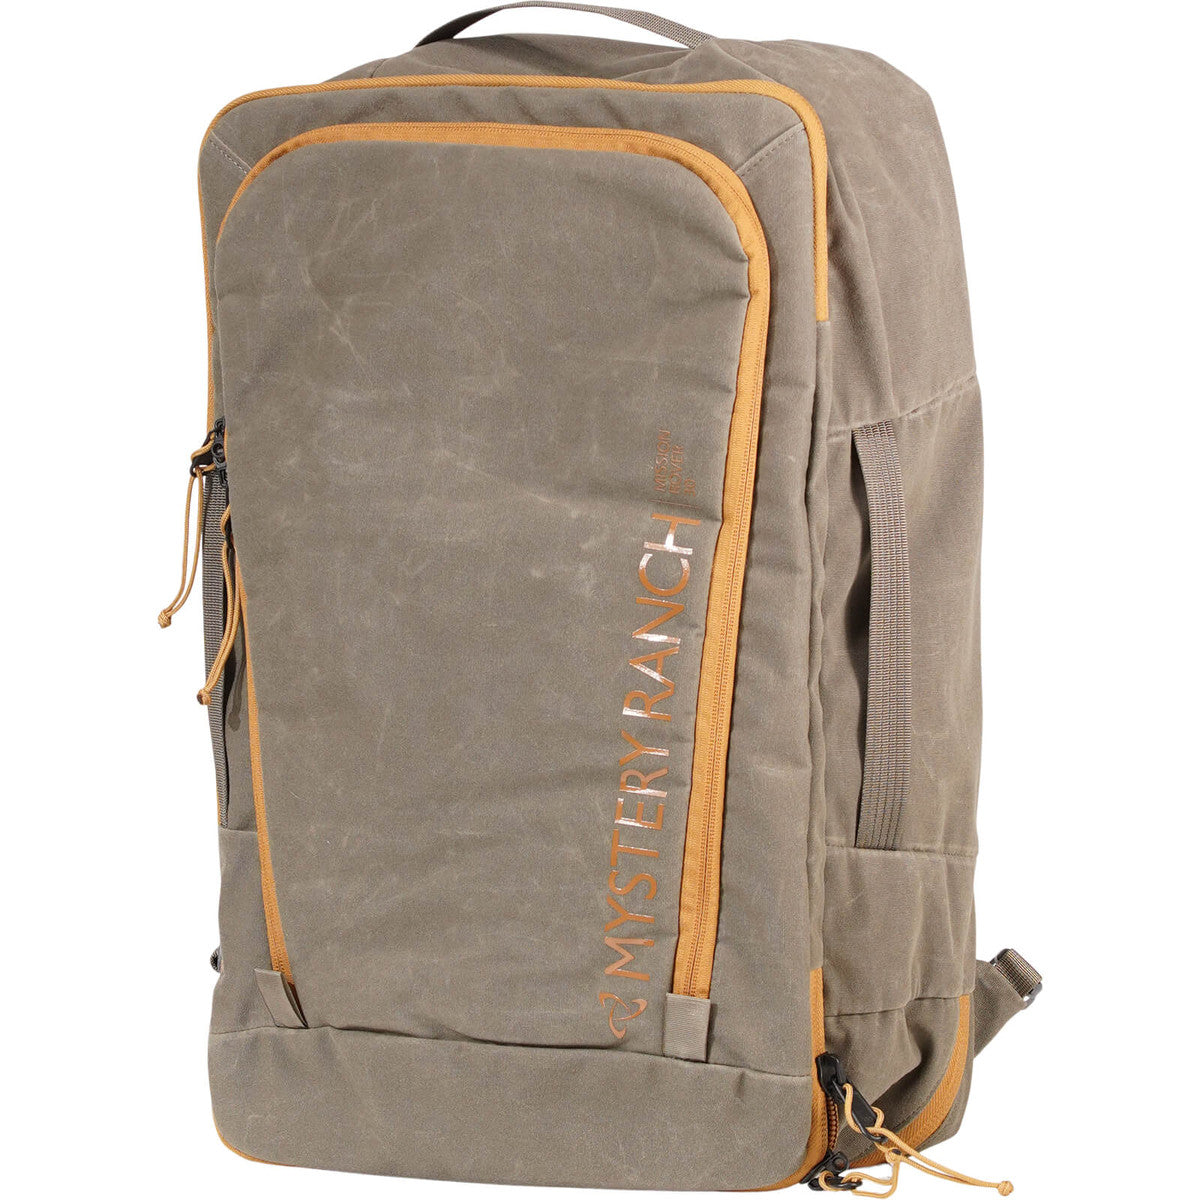 Verlichting Maxim Kwalificatie Mission Rover 30L — Native Summit Adventure Outfitters